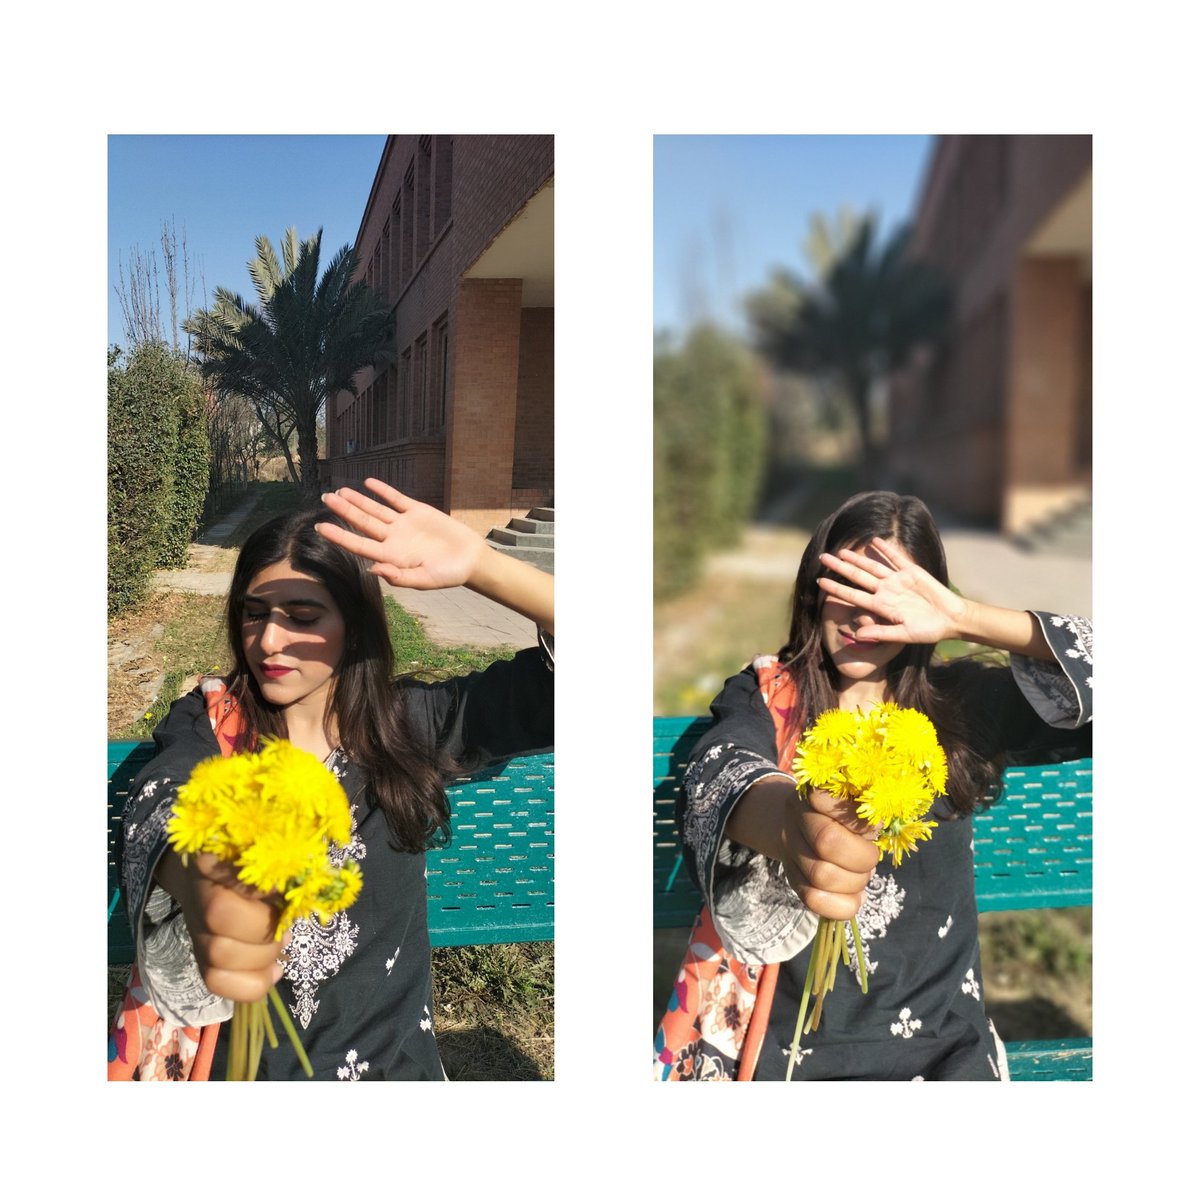 Always remember in the end the one who matter's is only 'you' 'Your self ' and your inner peace 🕊️❤️
#GreenEnergy #Flowers #BlackClover #Fresh #yellowflowers #postivethoughts #fashiontechnology #beautyoftechnology #creativetechnology